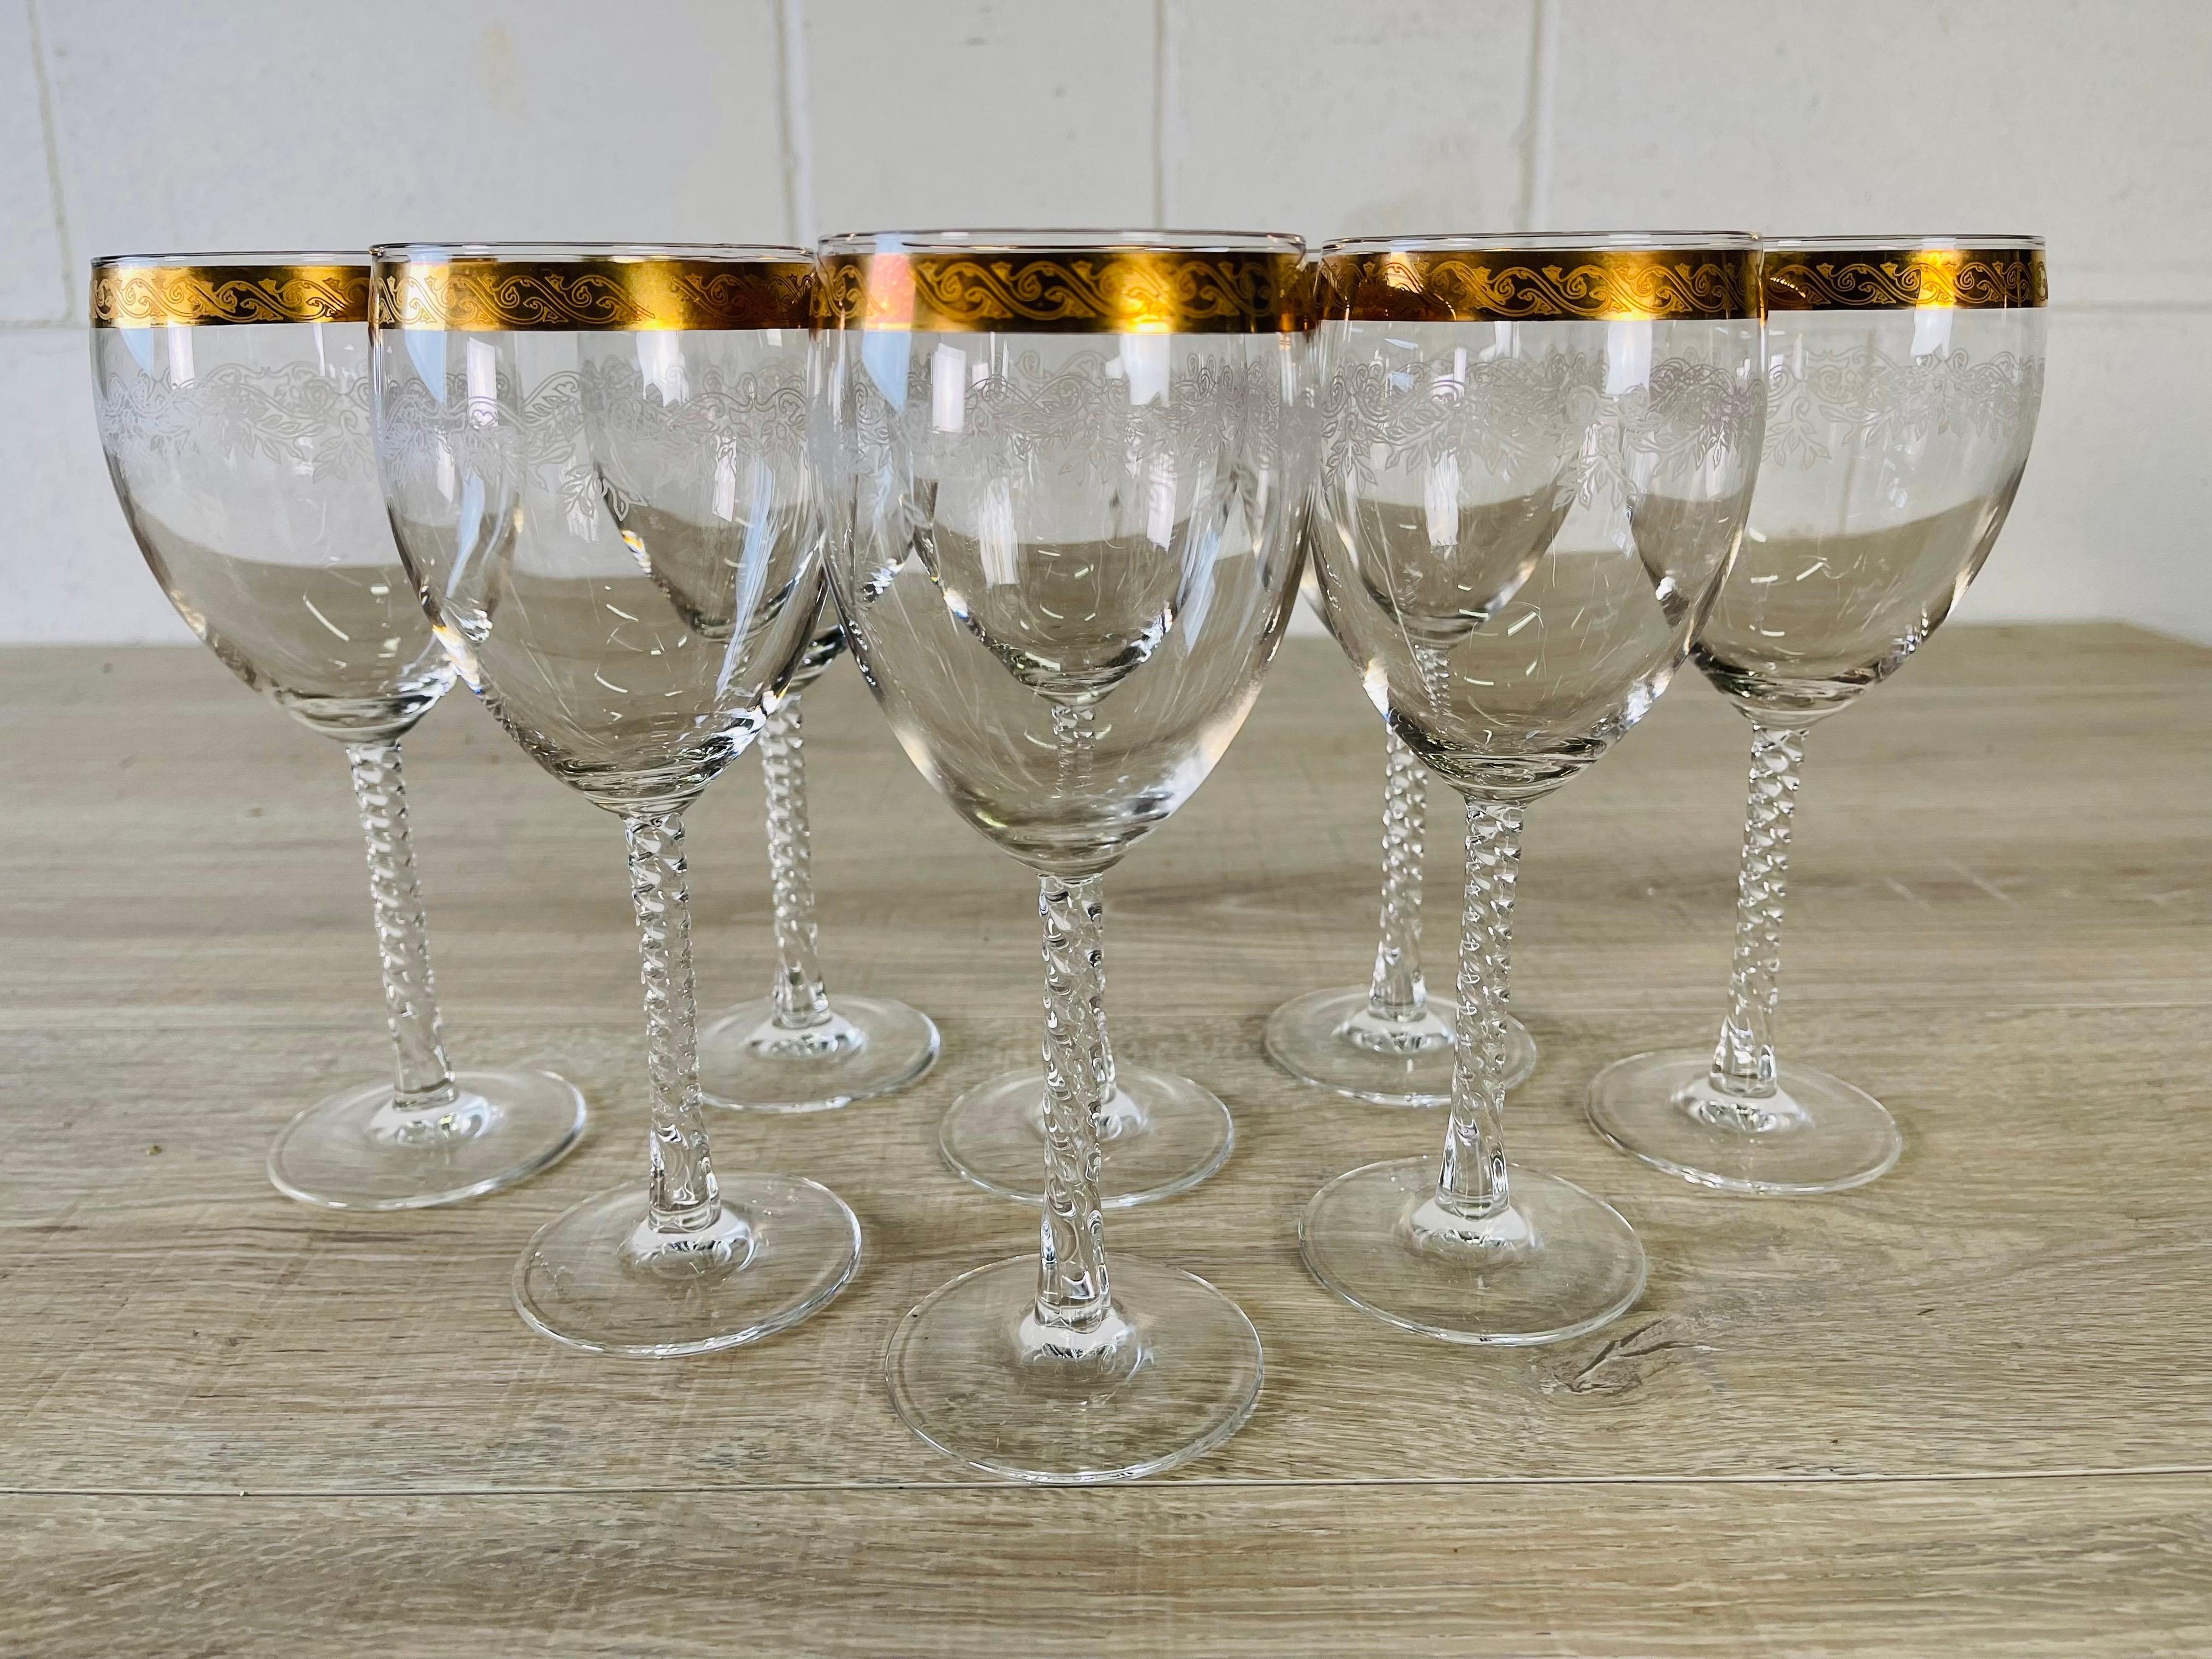 Vintage 1960s set of 8 tall gold floral rimmed wine goblets with twisted stems. No marks.